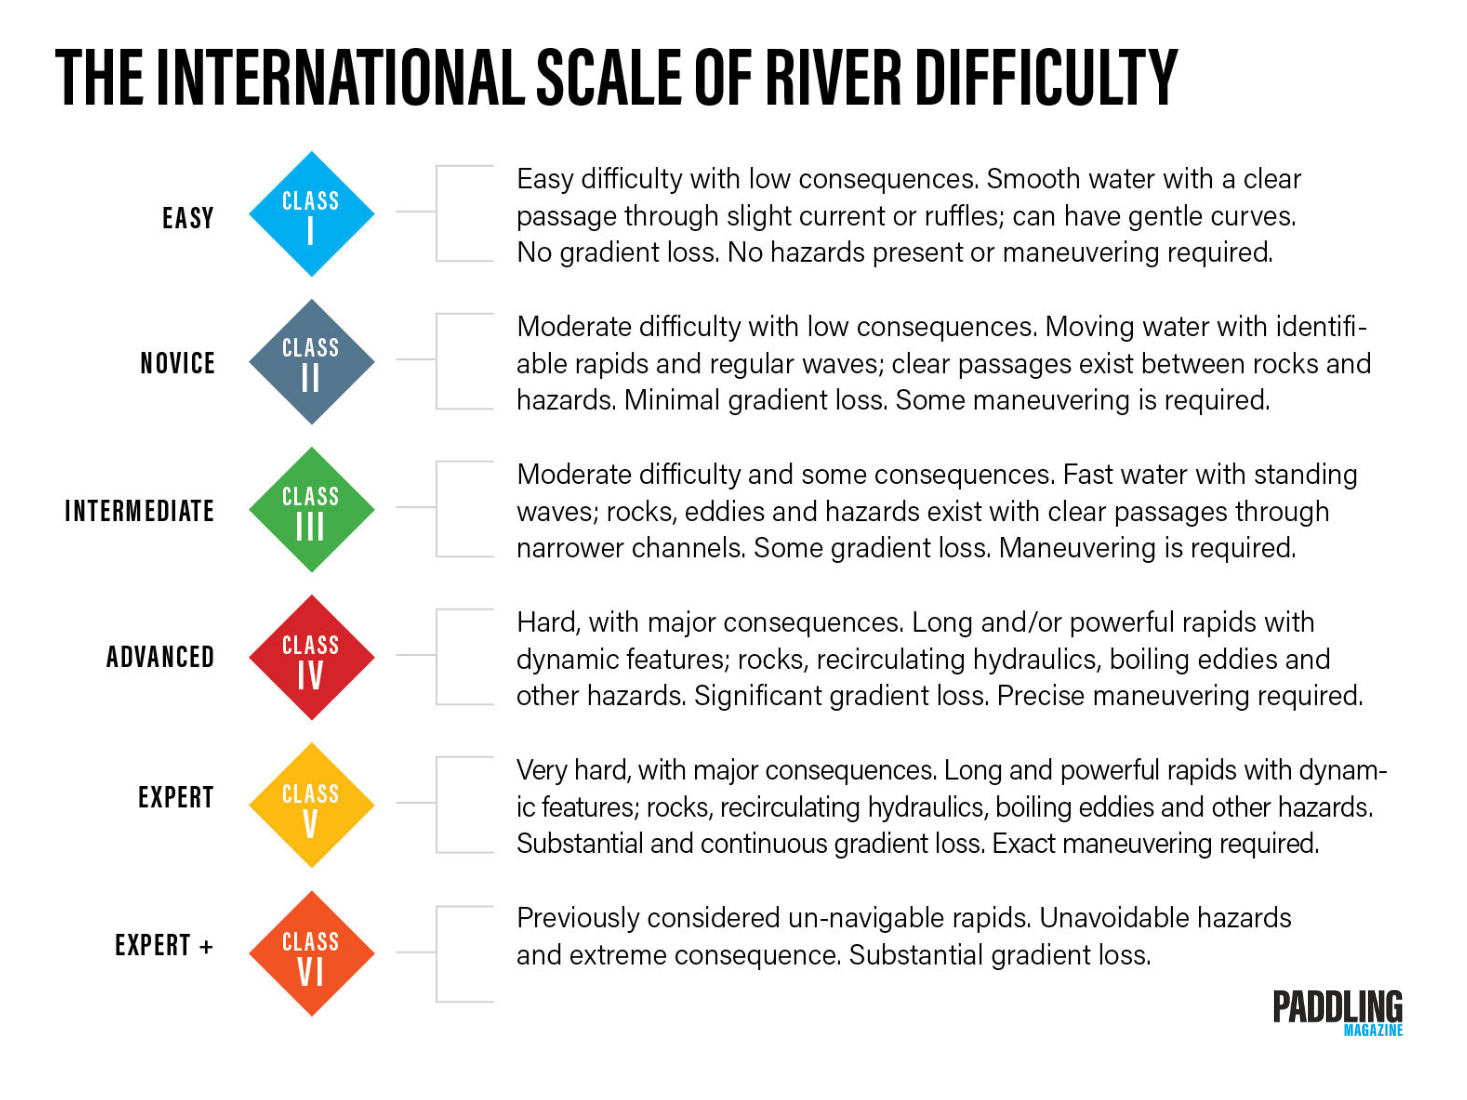 Internationa Scale of River Difficulty -Permission to use by Paddling Magazine